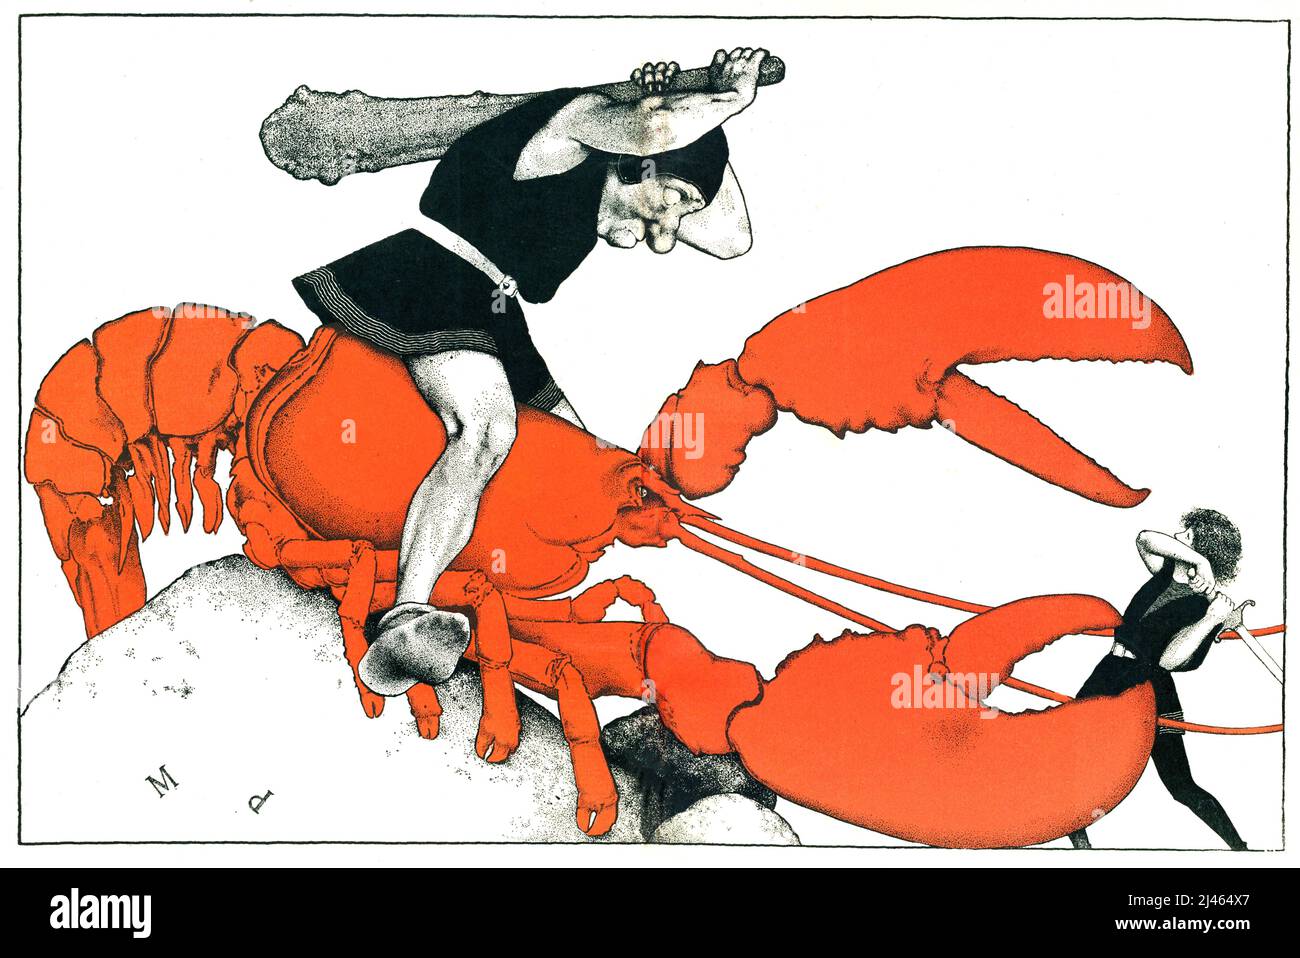 Maxfield Parrish - Surreal image of a club wielding weirdo riding a big red lobster attacking our brave hero - David and Goliath story - 1904 Stock Photo